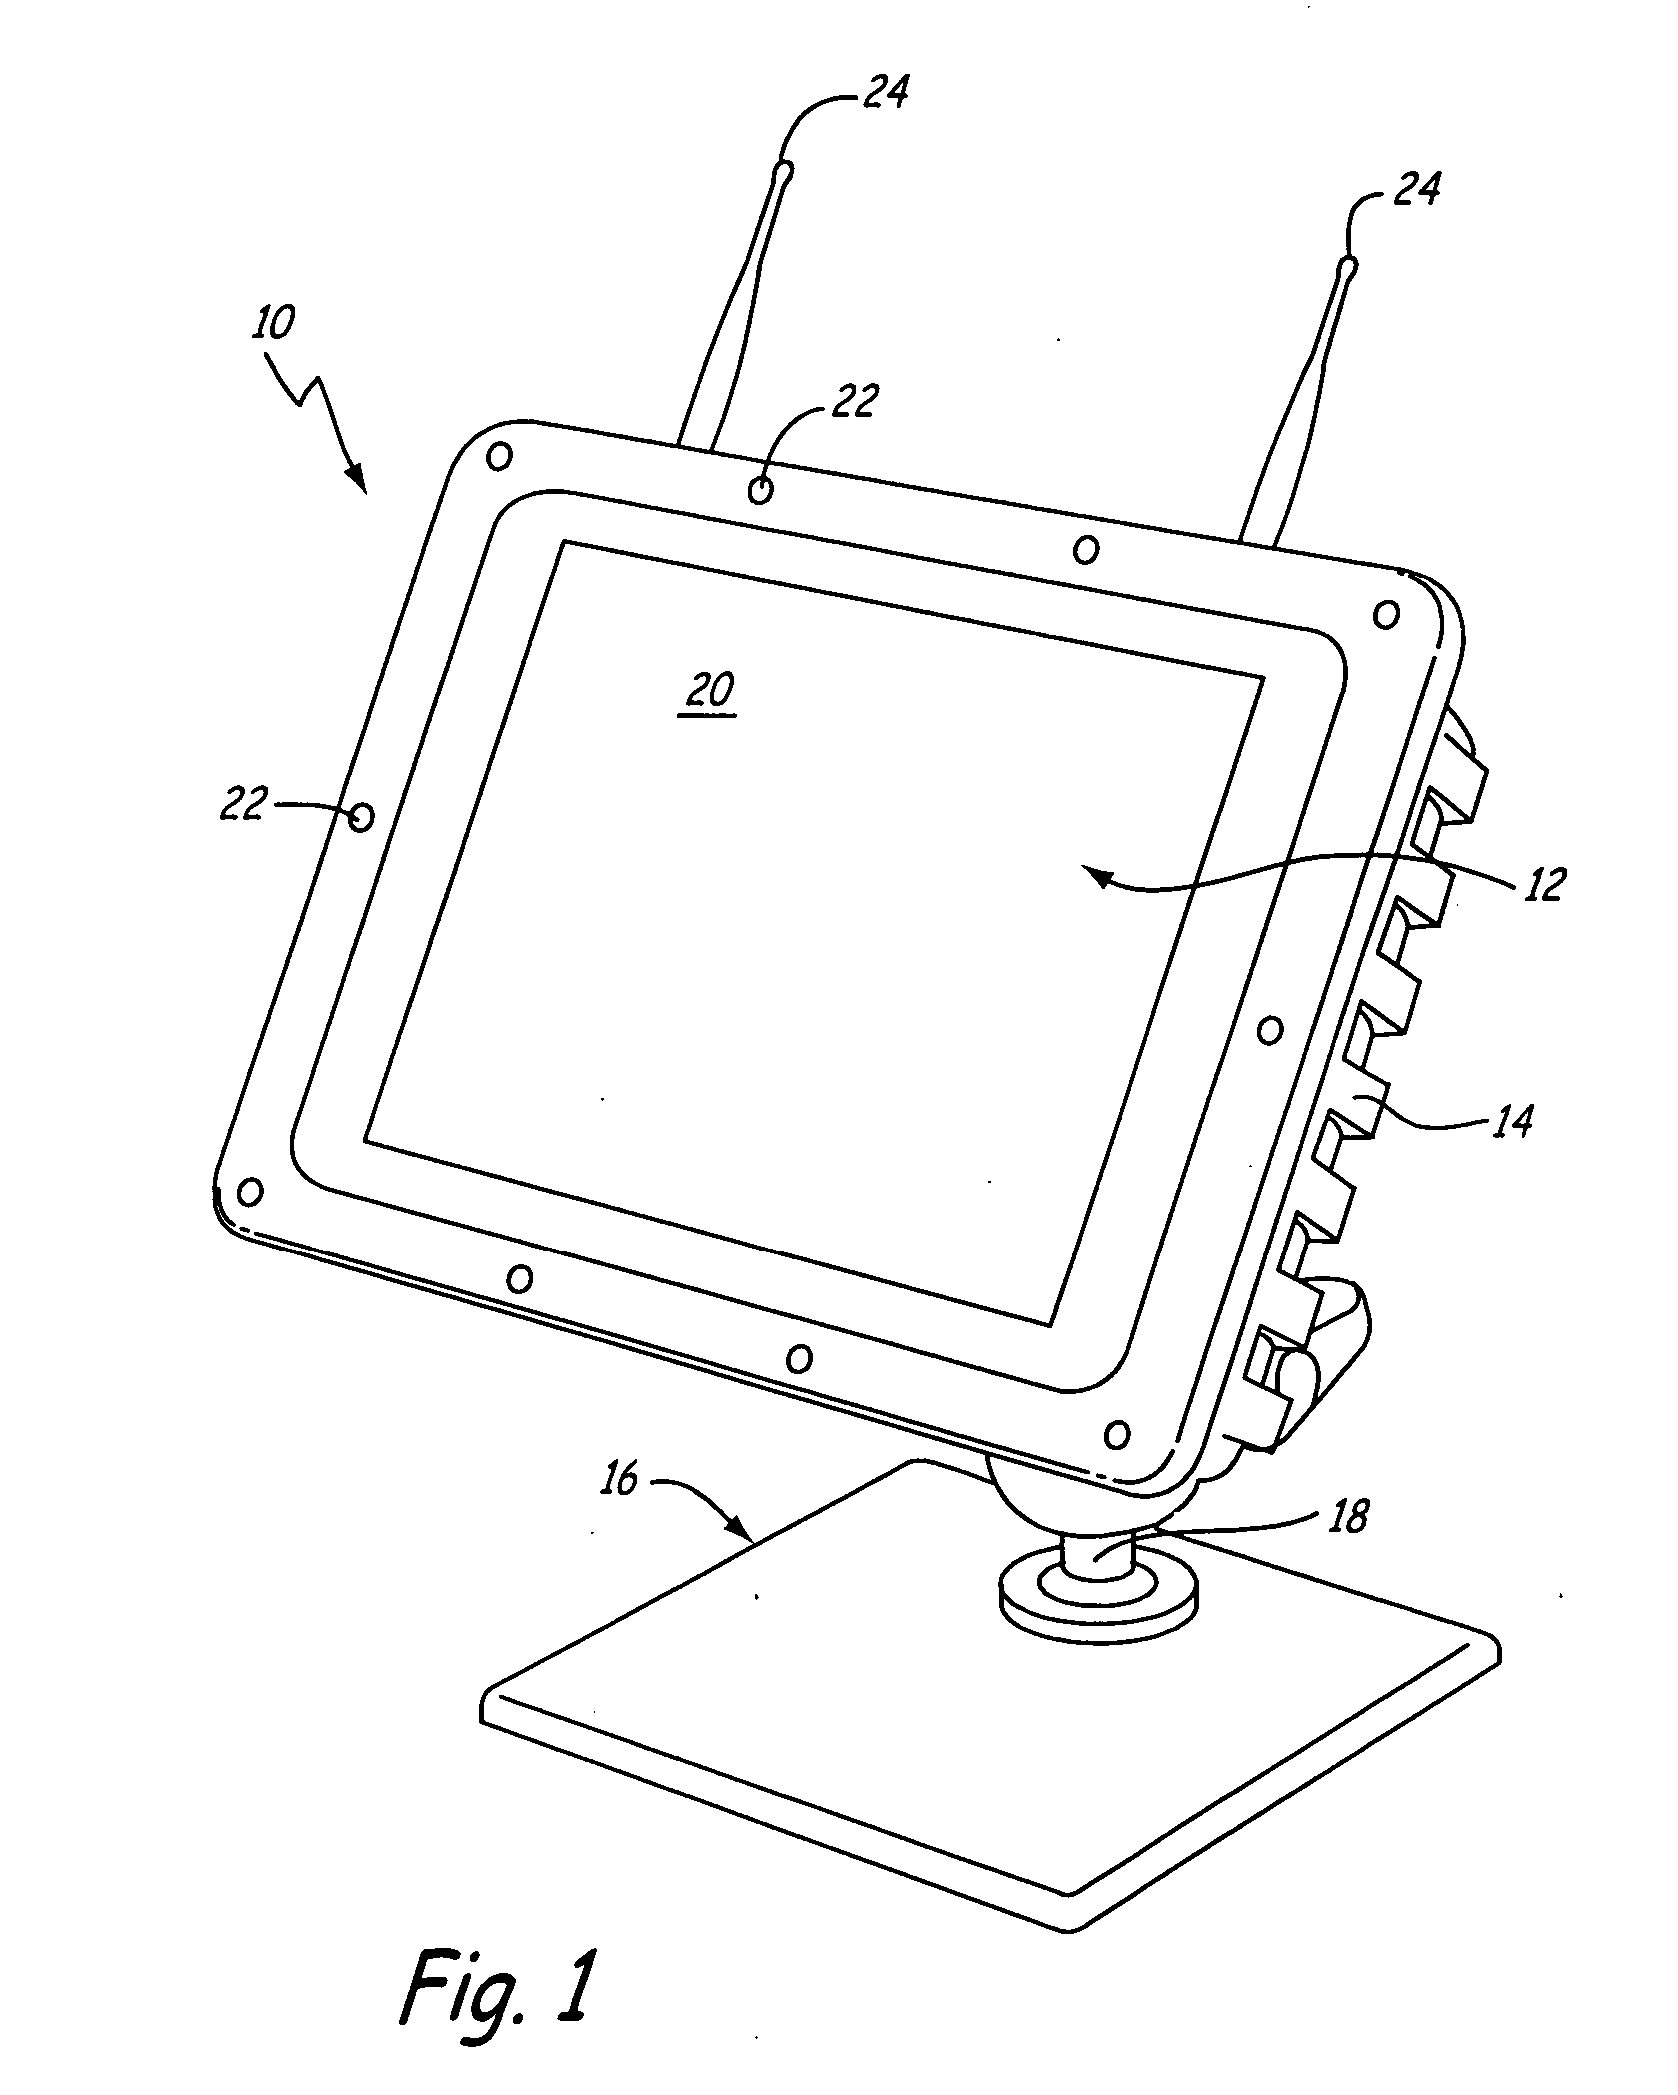 Integrated antenna/access door for a mobile computer